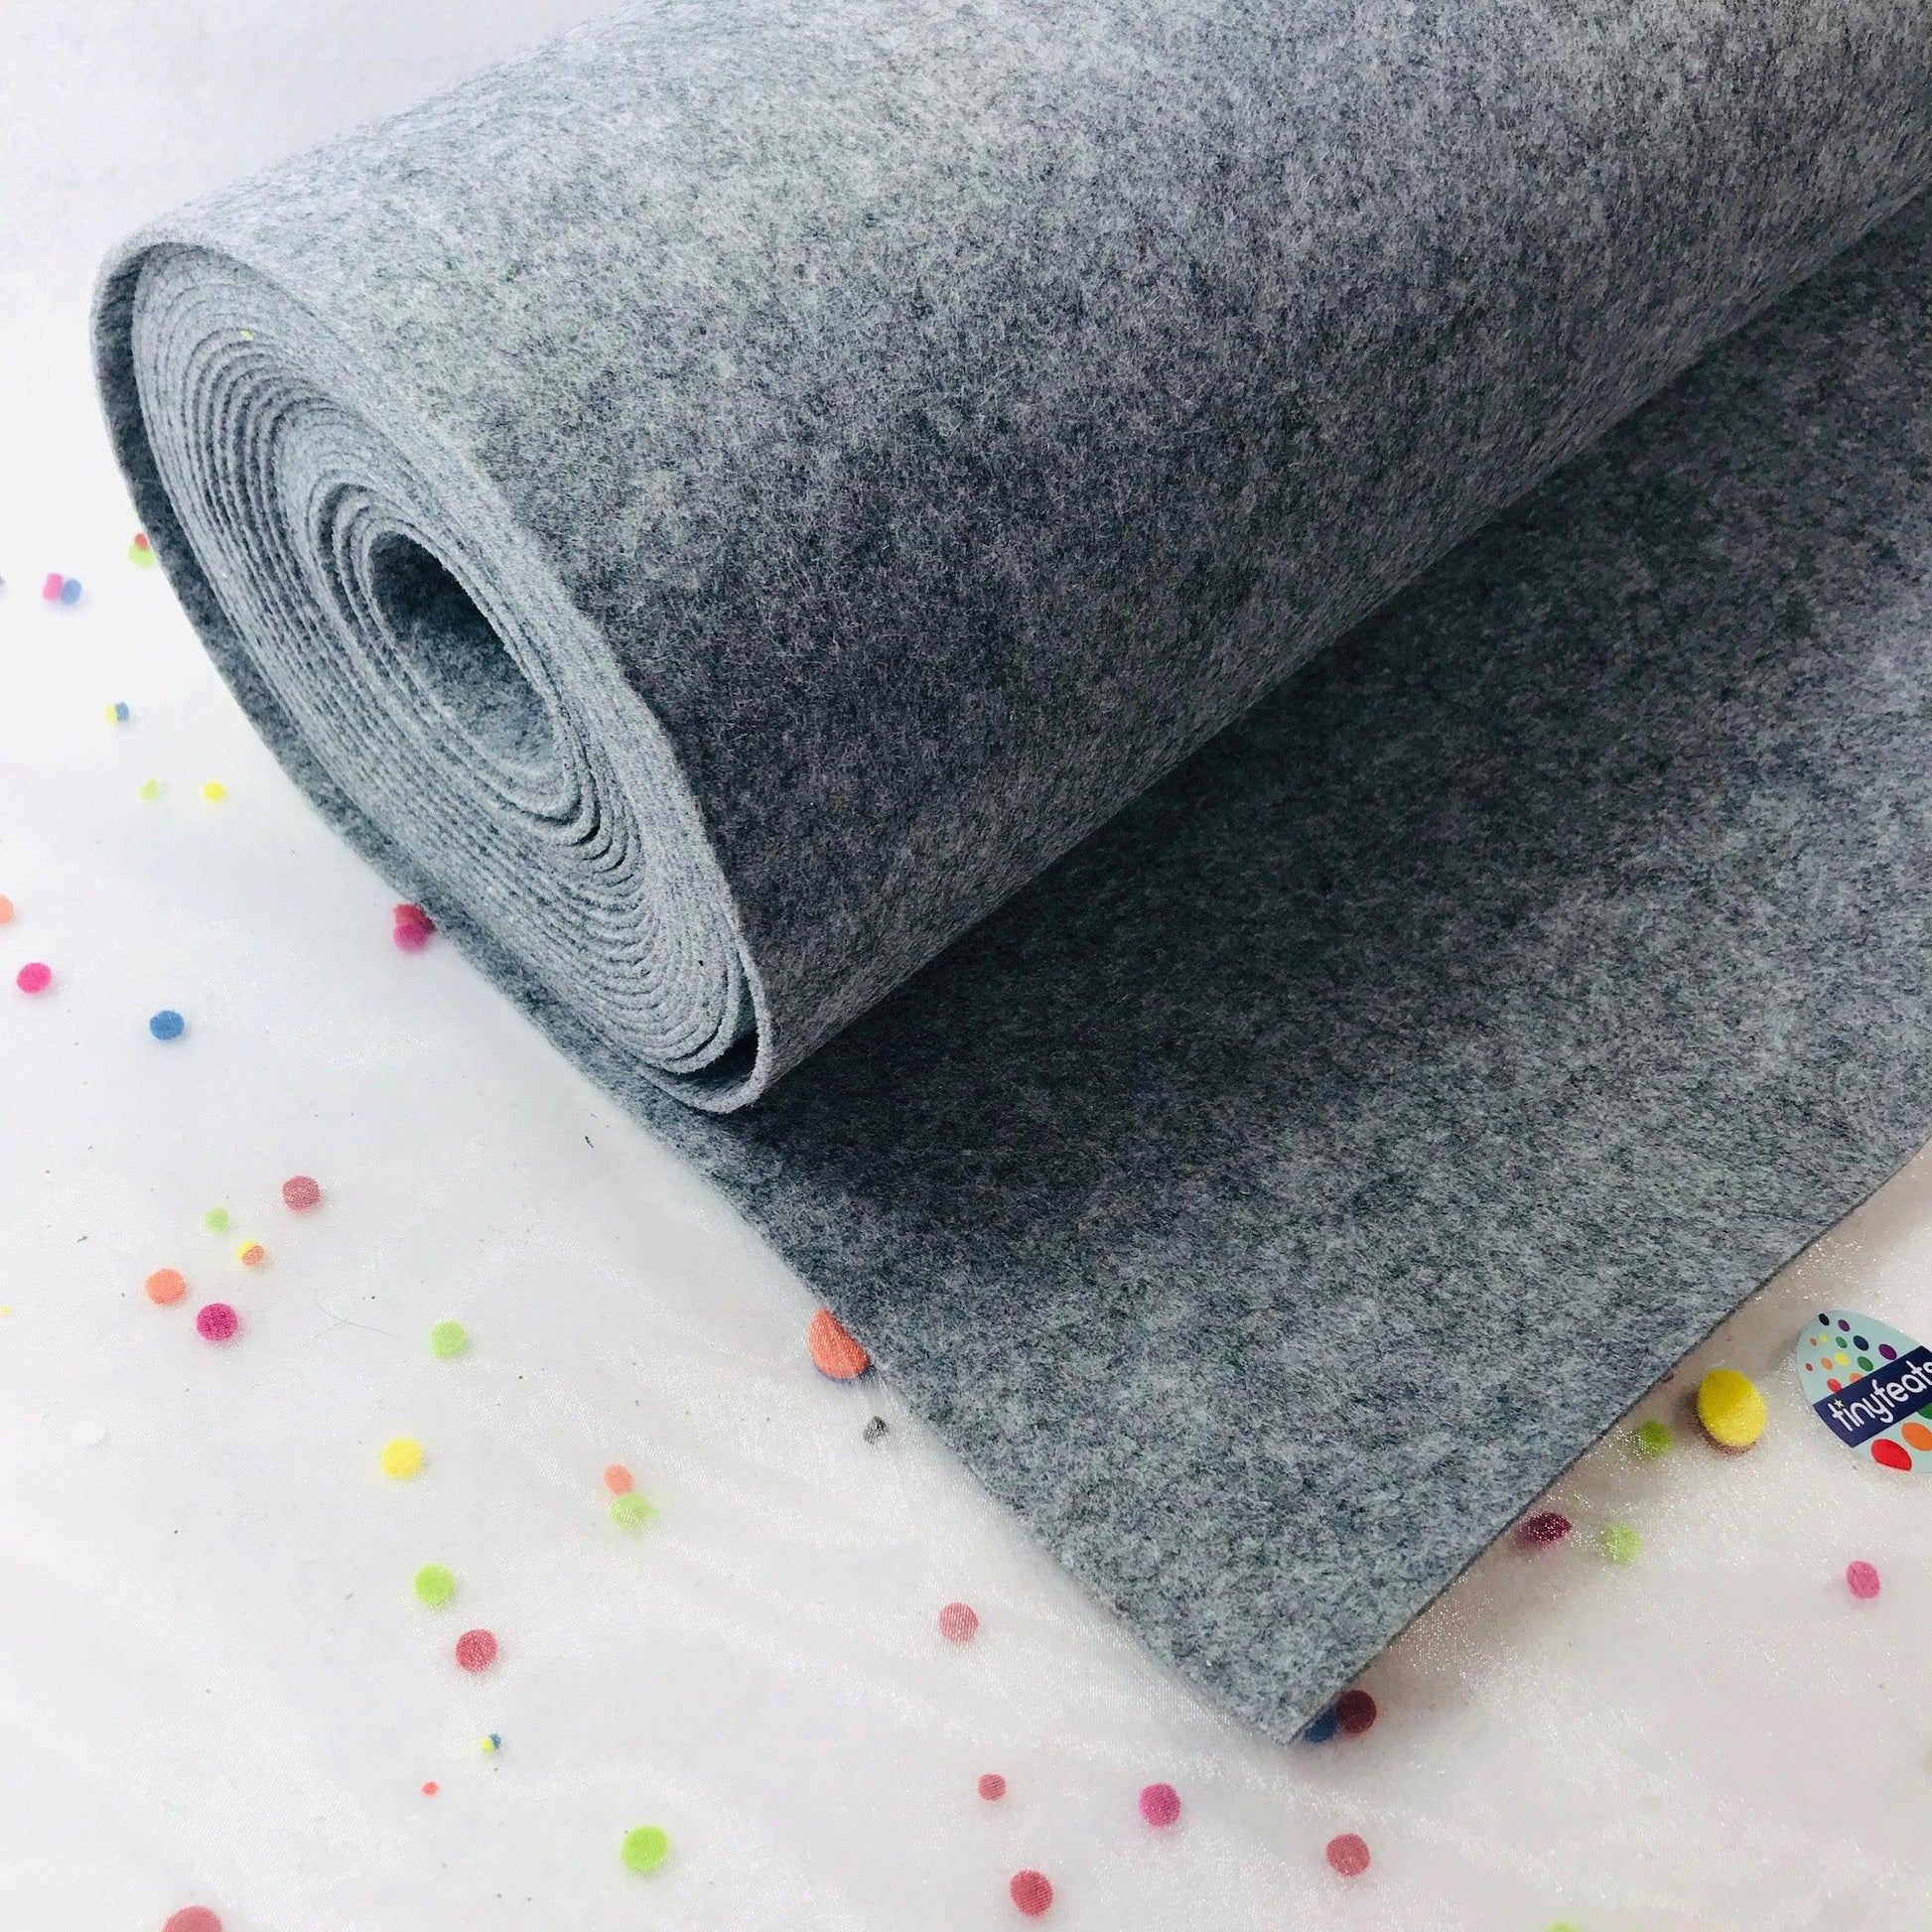 Extra Thick Felt 3-4mm Perfect for craft! - The Cheap Shop Tiptree